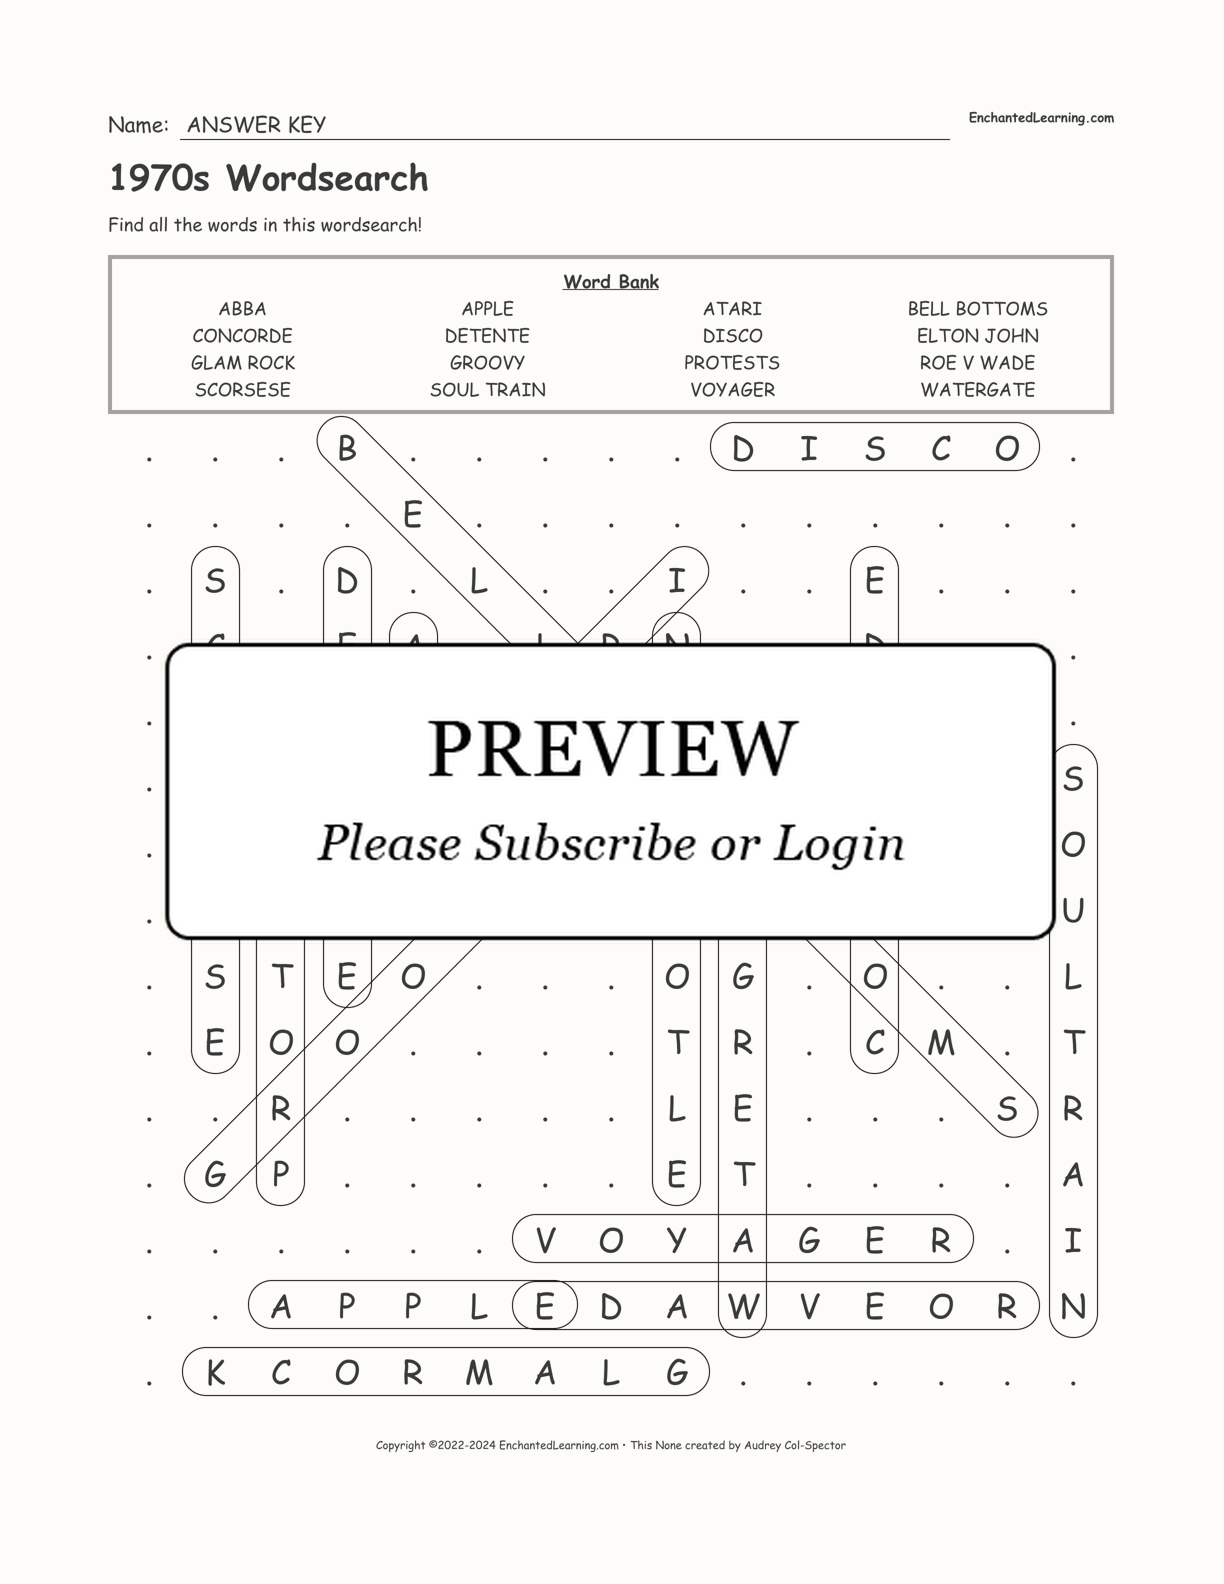 1970s Wordsearch interactive worksheet page 2